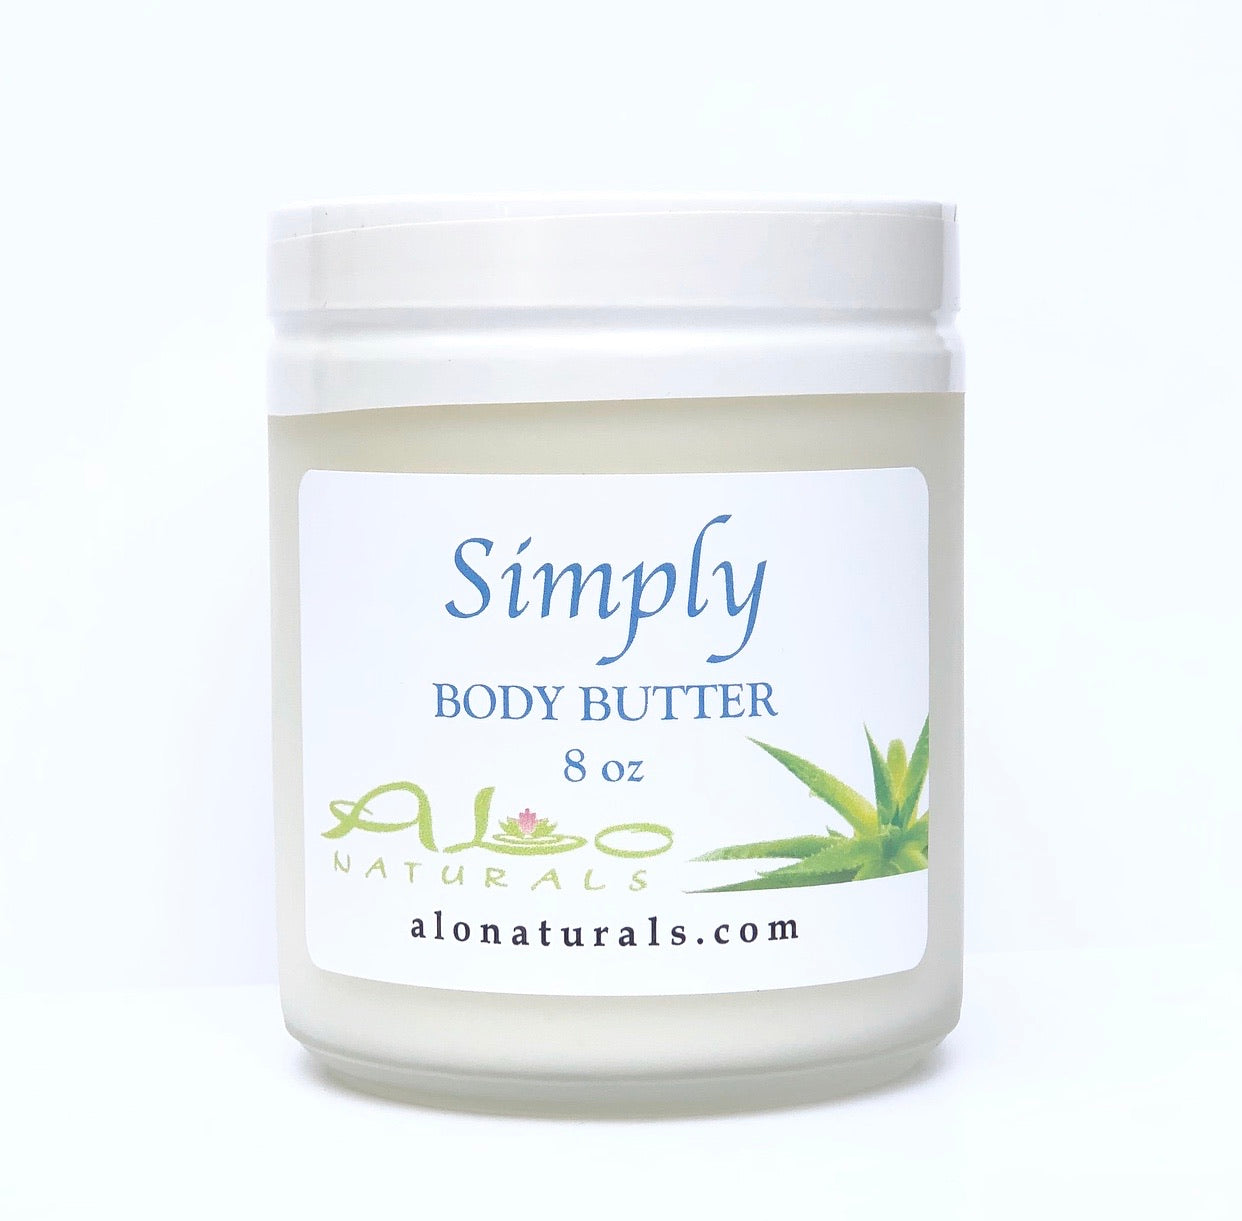 This natural body butter has been kept simple and unscented.  It is formulated to heal and hydrate.  Helps promote collagen production and aids in treating eczema and psoriasis.  Great for sensitive skin.  It moisturizes, nourishes, and regenerates skin to promote a healthy and radiant glow.  8oz jar.